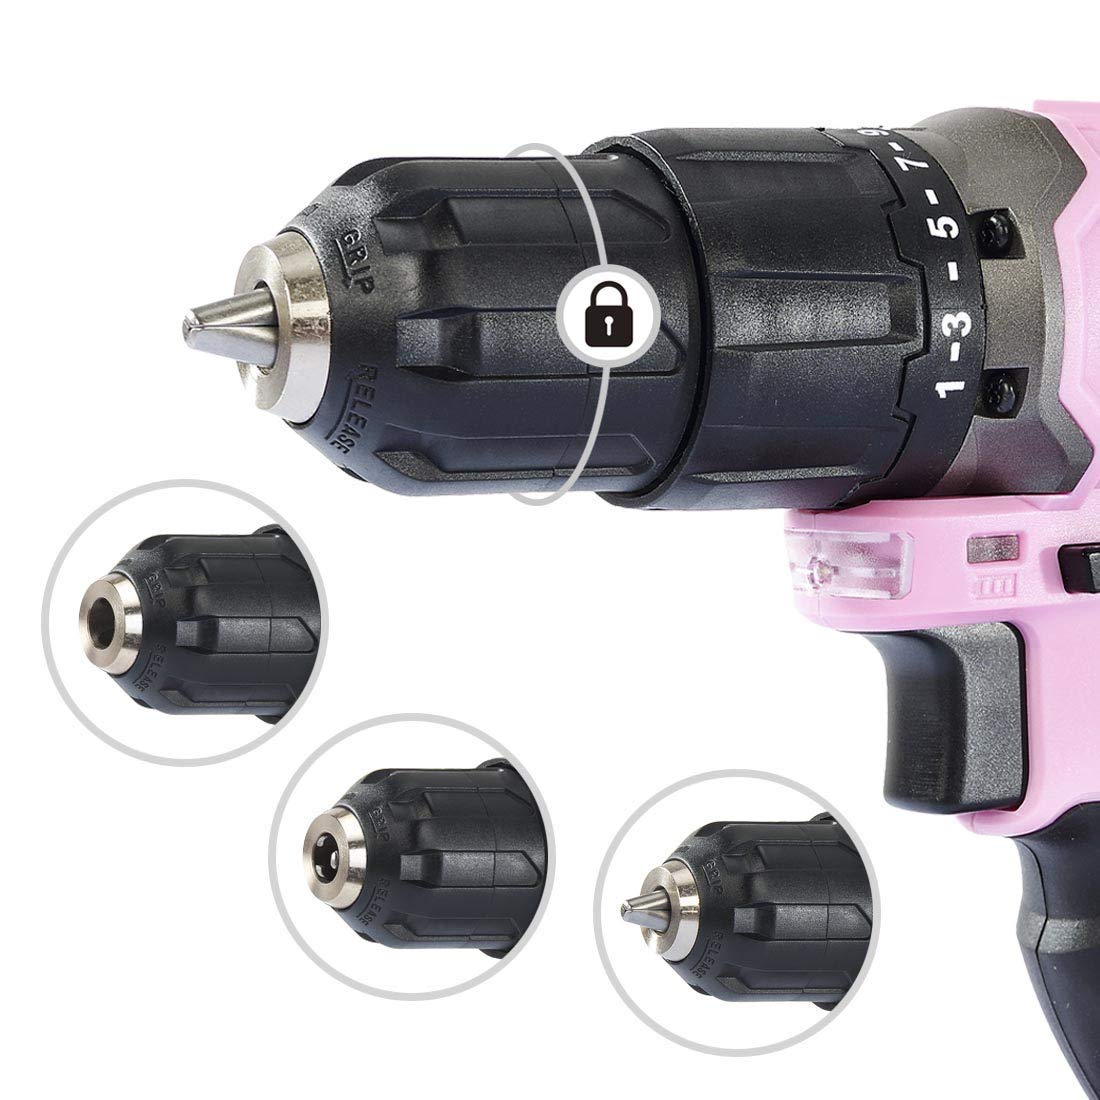 WORKPRO Pink Cordless 20V Lithium-ion Drill Driver Set (1.5Ah), 1 Battery, Charger and Storage Bag Included and Spare Charger for Replacement